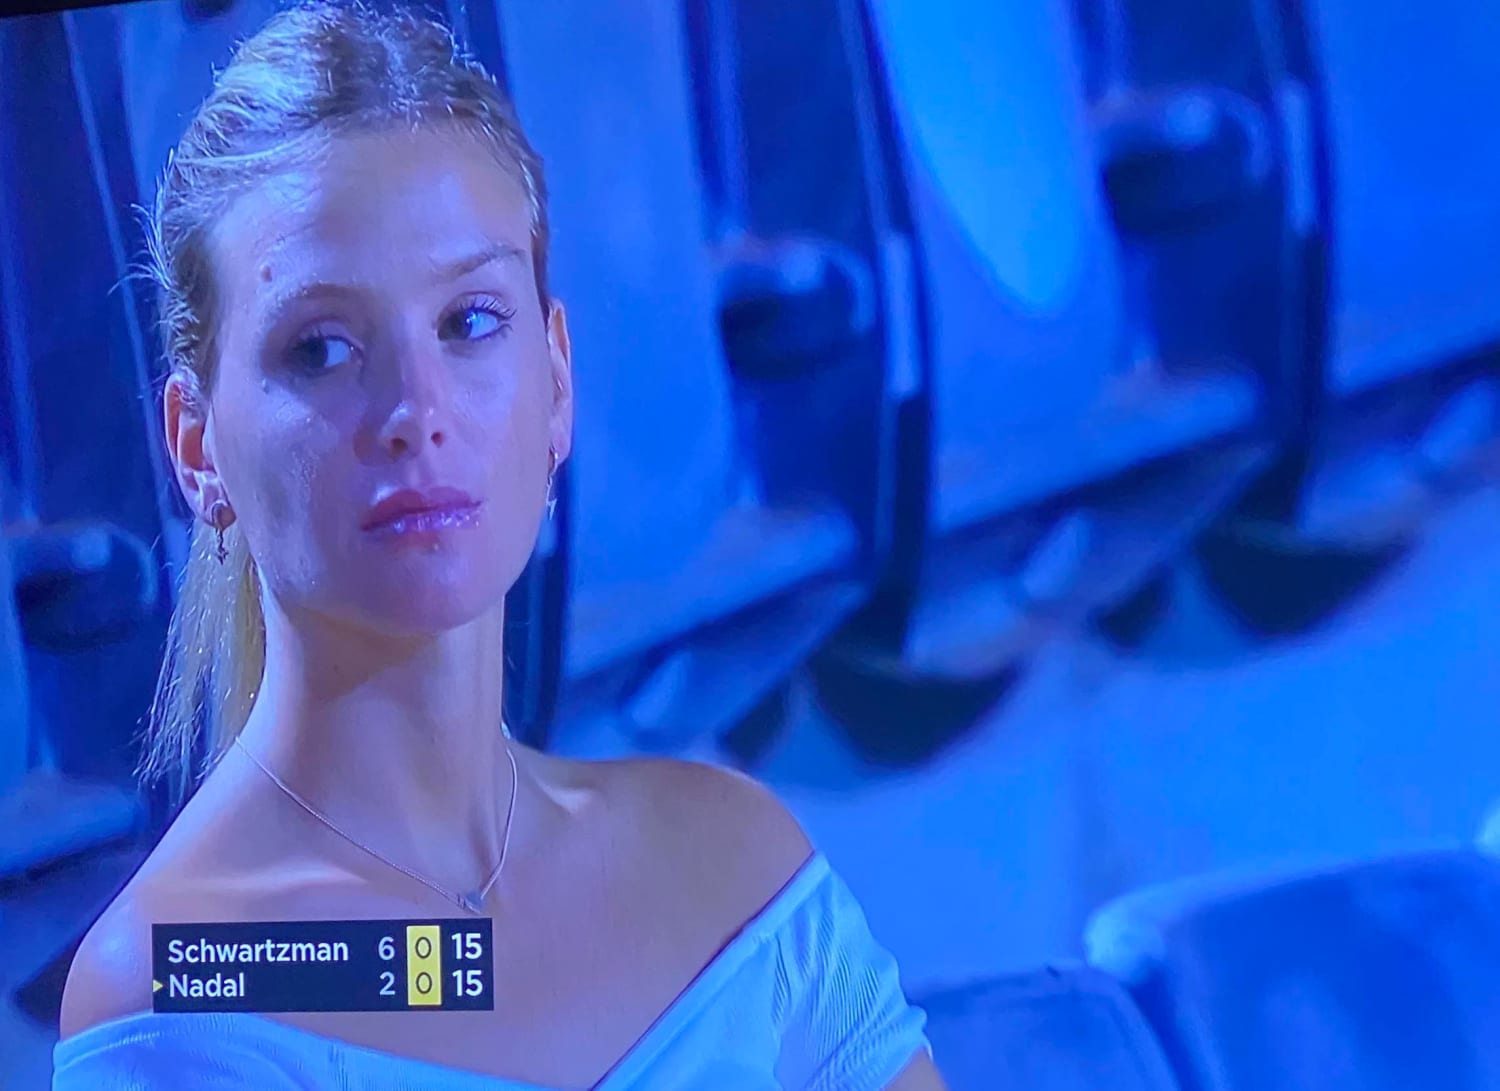 Everyone: OMG Schwartzman is playing amazing, this is incredible tennis!! Cameraperson: